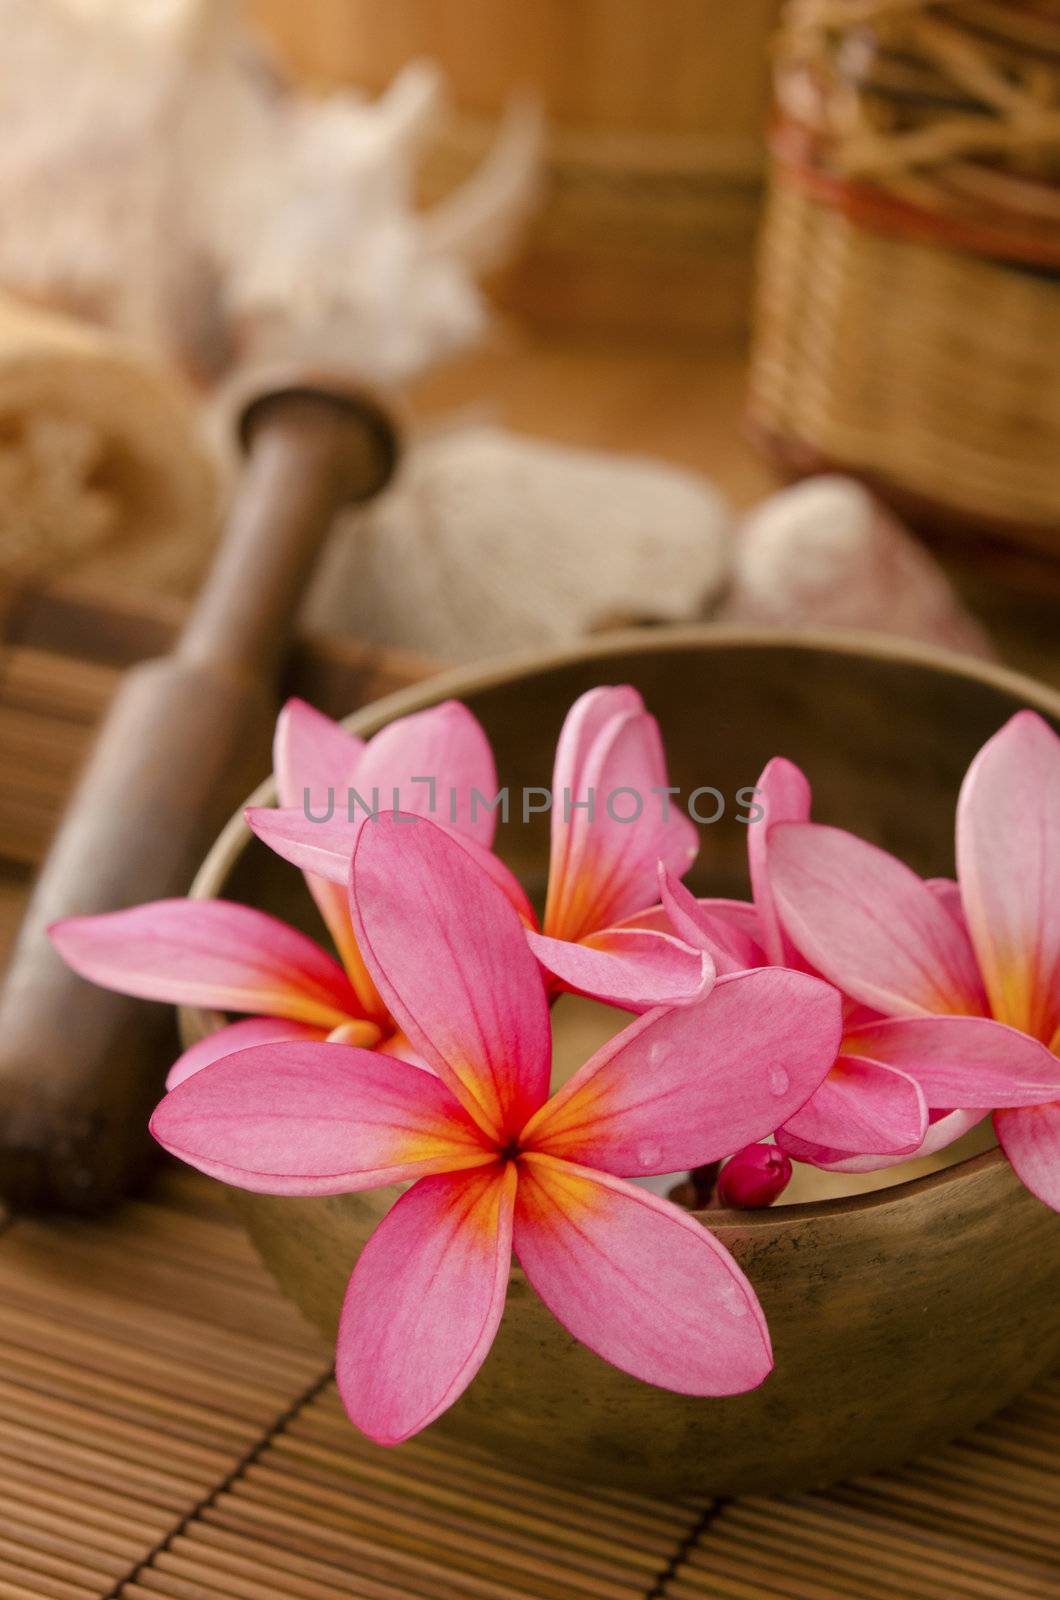 tropical spa with frangipani flowers by yuliang11